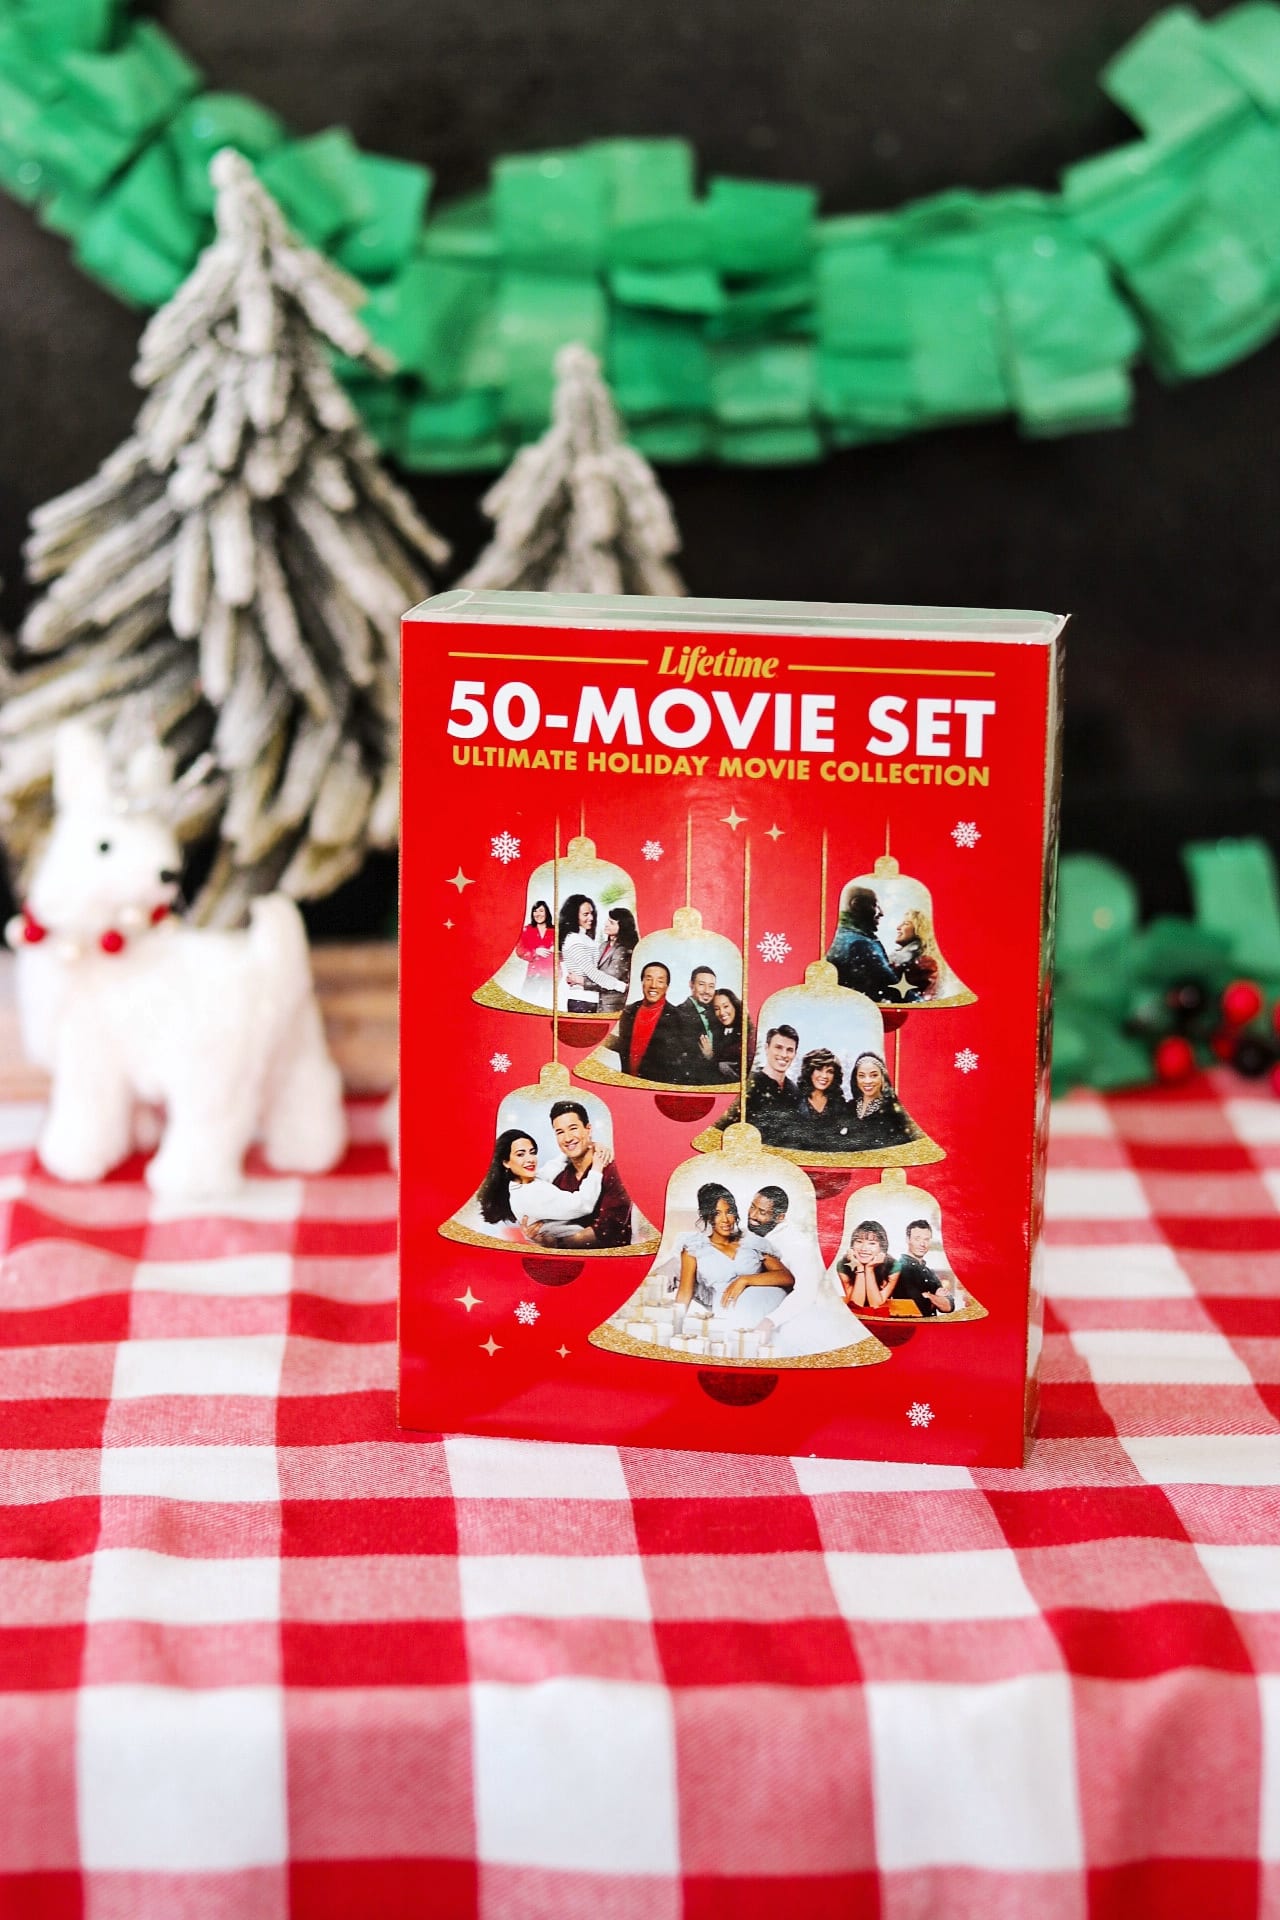 Lifetime®’s Ultimate Holiday Movie Collection 